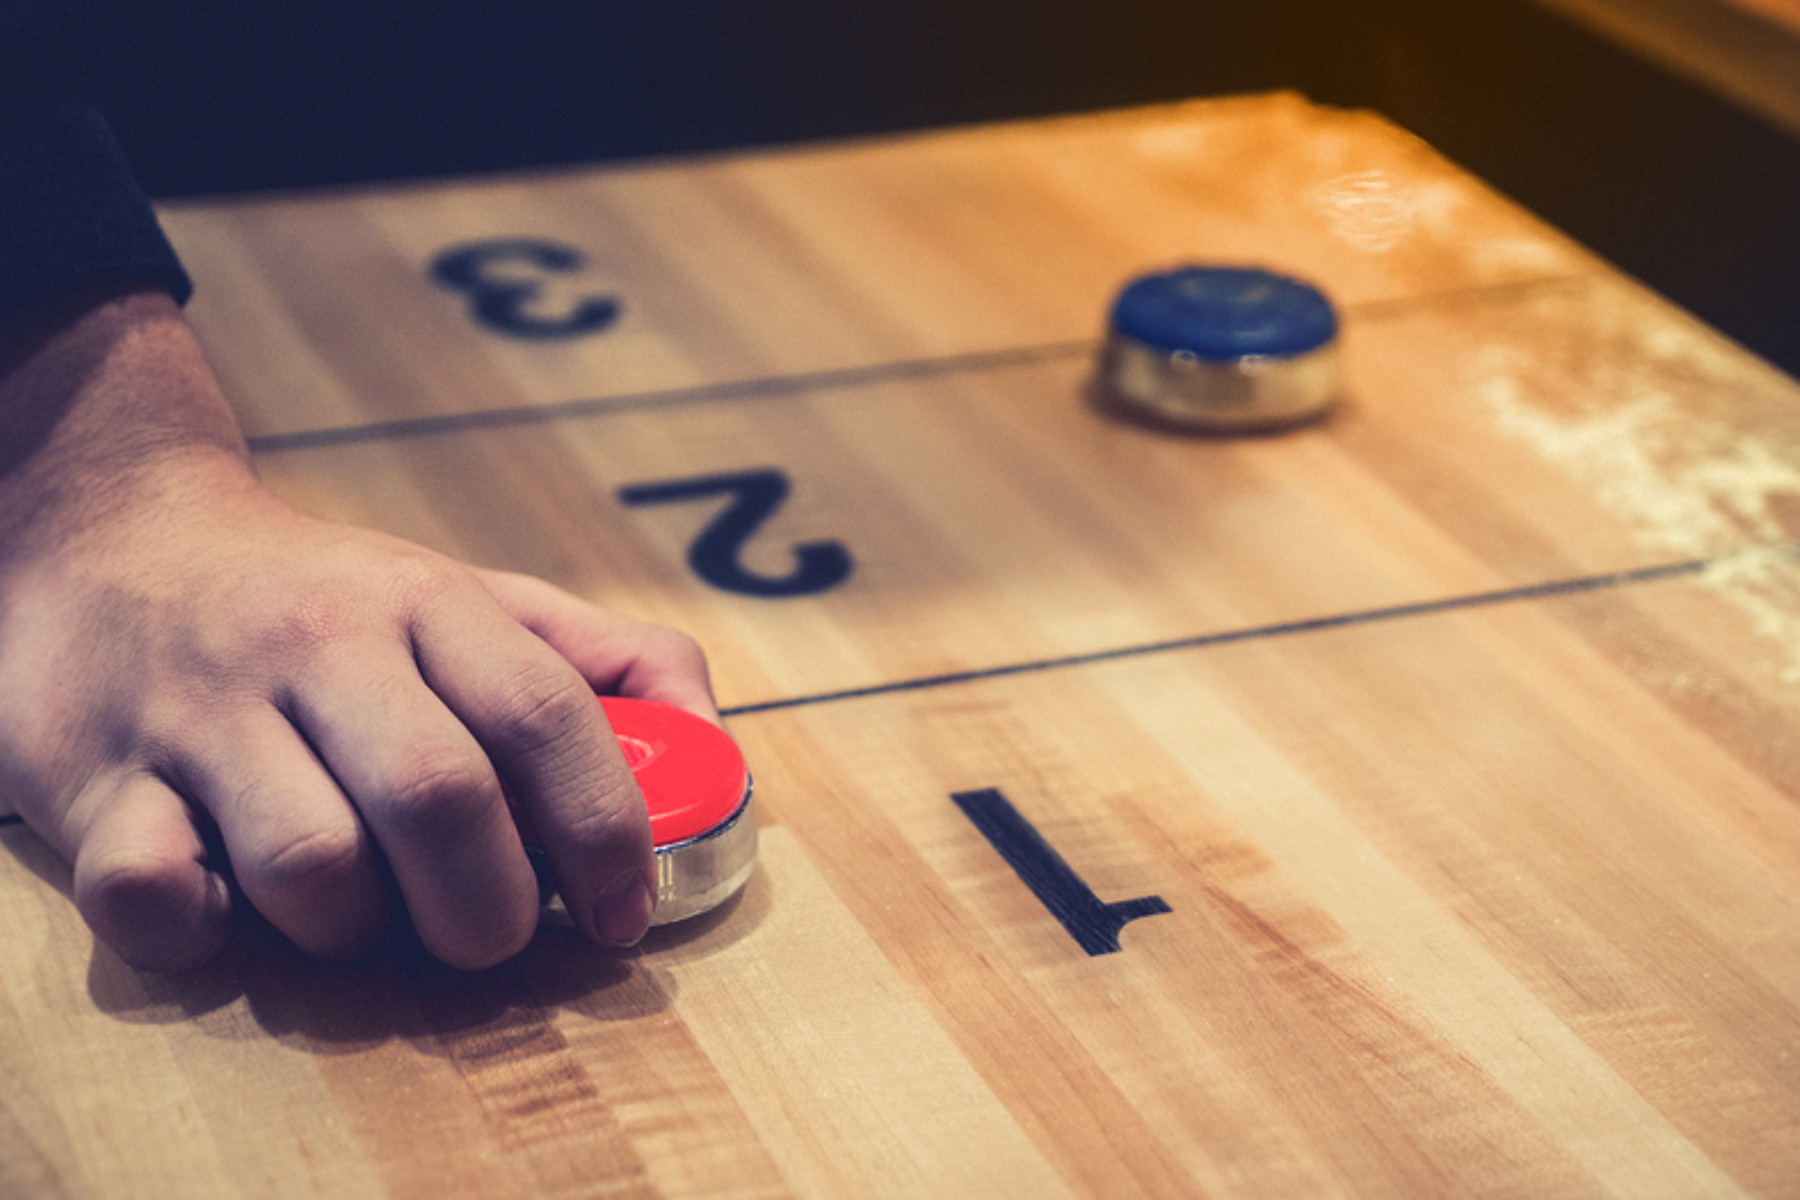 A red puck is being held by a hand next to a blue puck on a shuffleboard